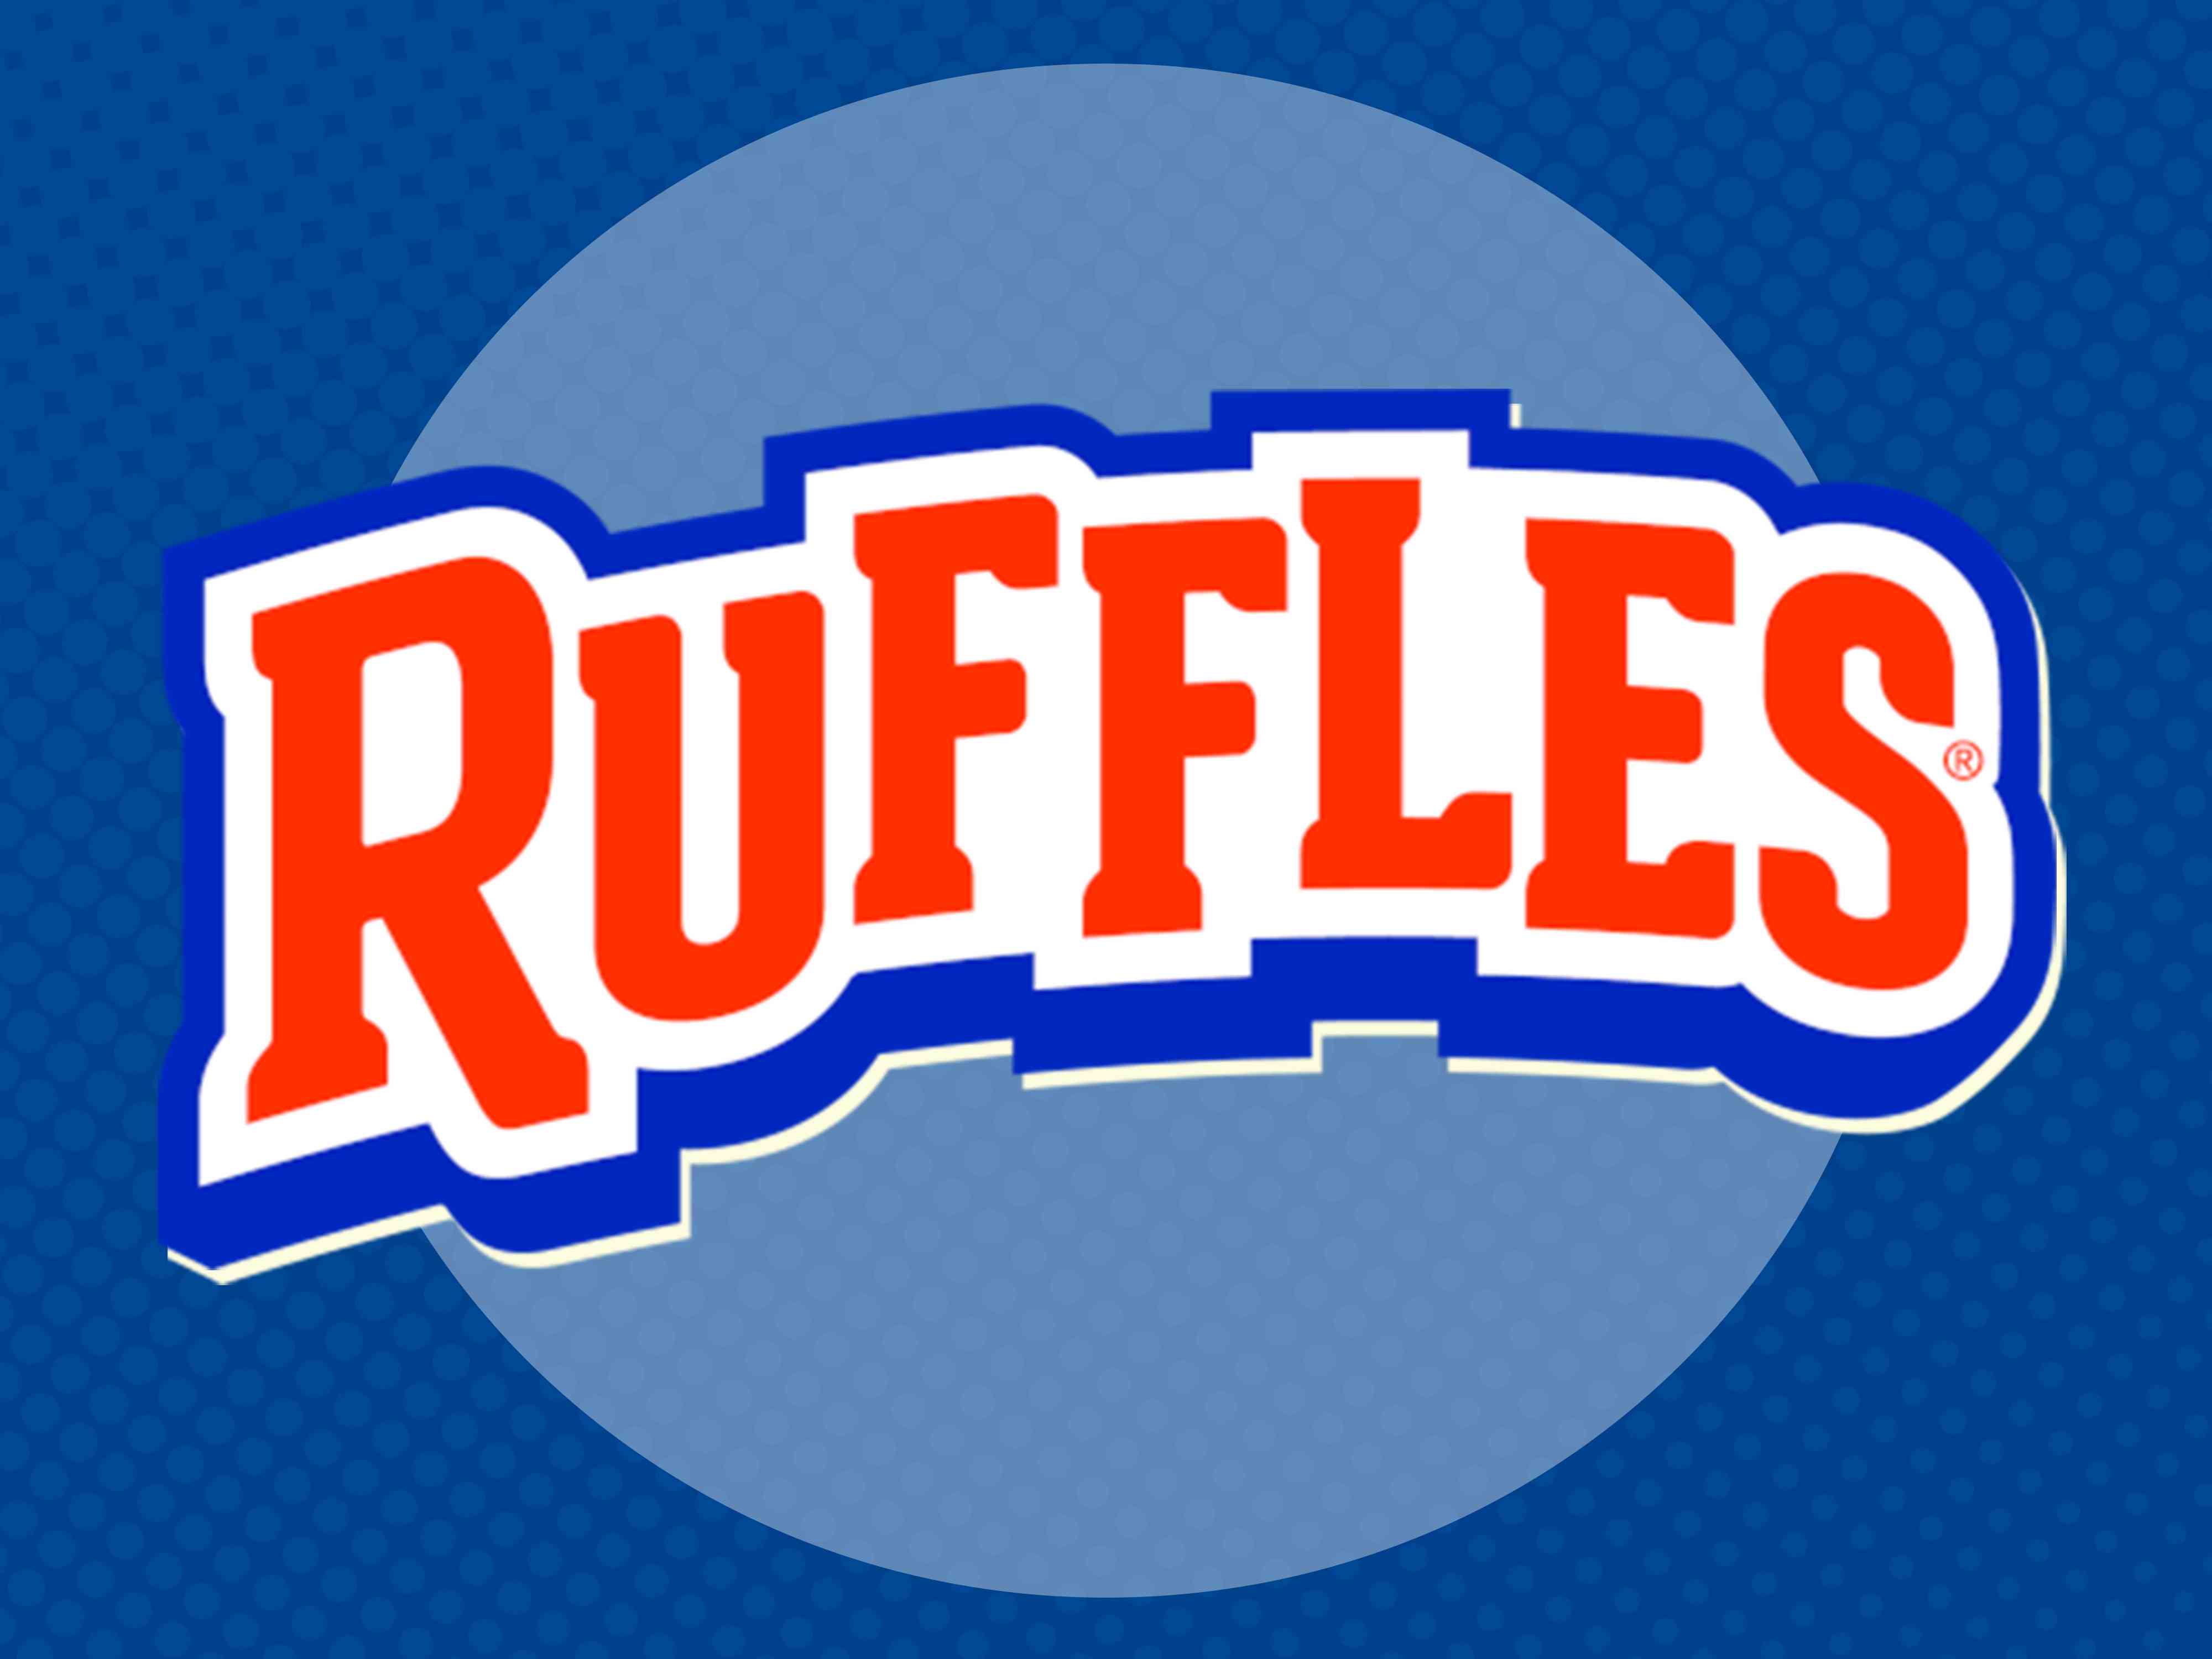 Ruffles Has a New Chip Flavor Heading to Shelves Soon